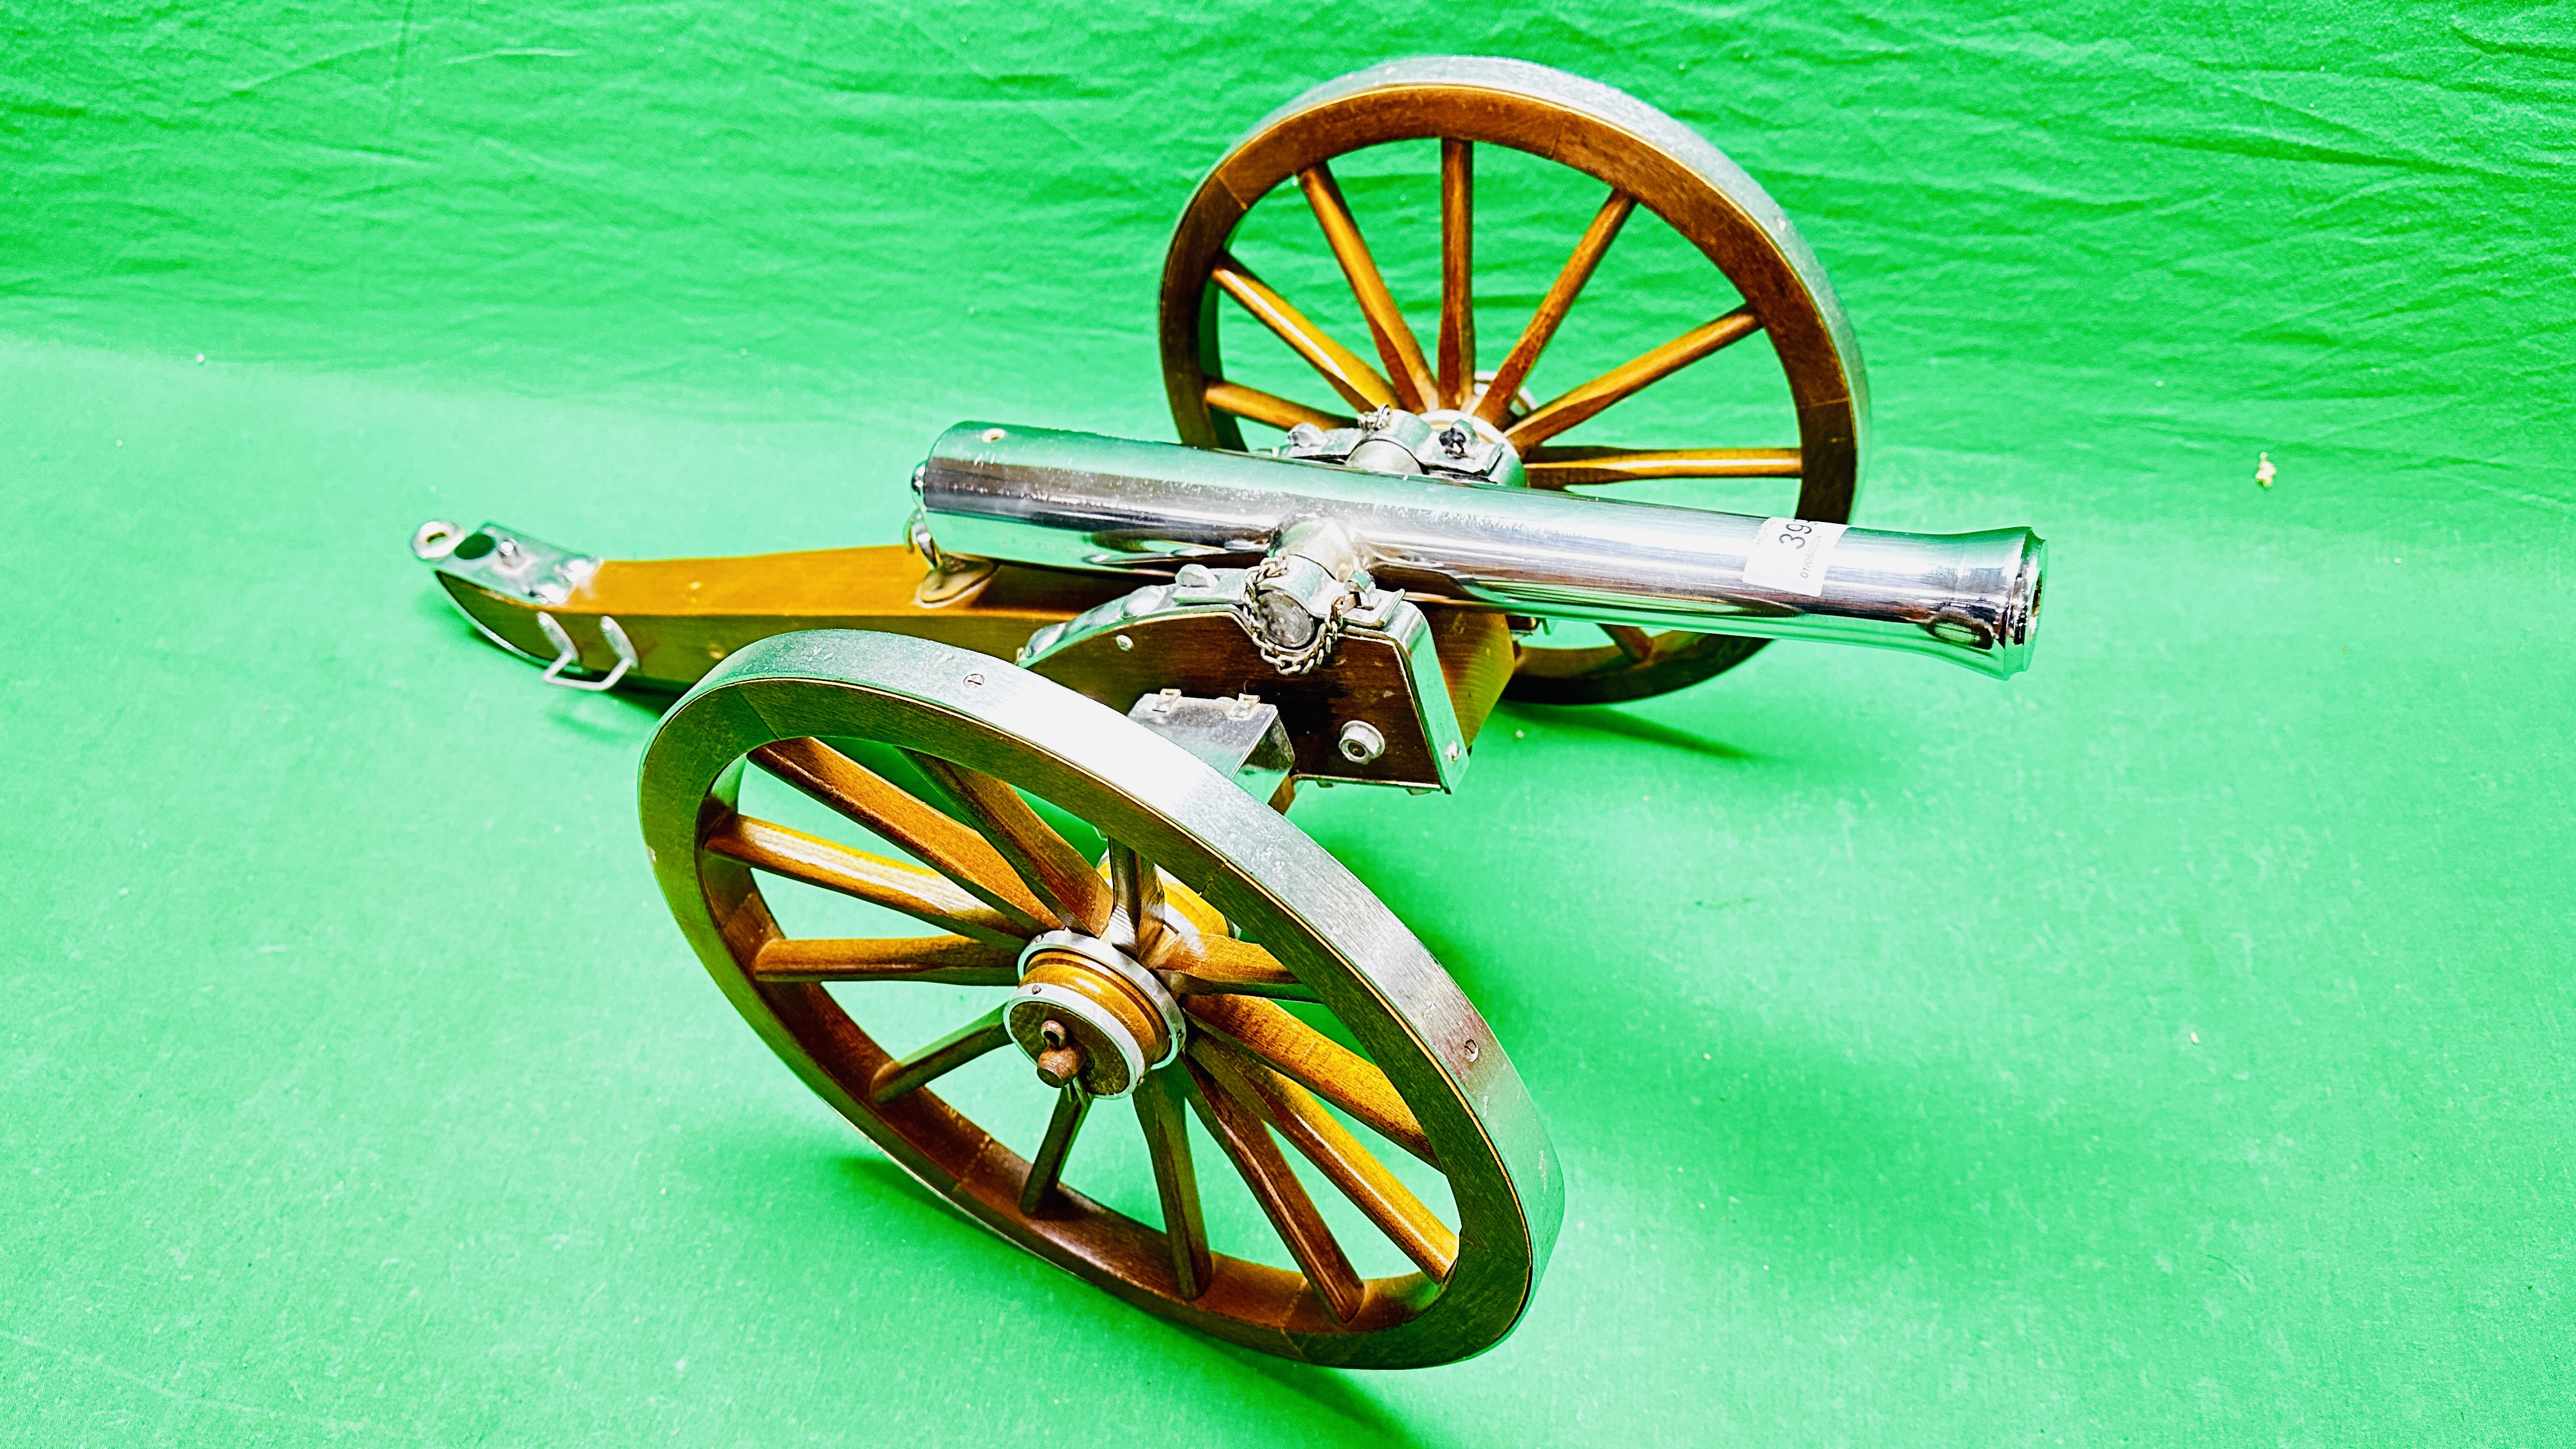 A SPANISH 75 CAL BLACK POWDER ARMAS GIL CANNON 14" BARREL MOUNTED ON A CARRIAGE.